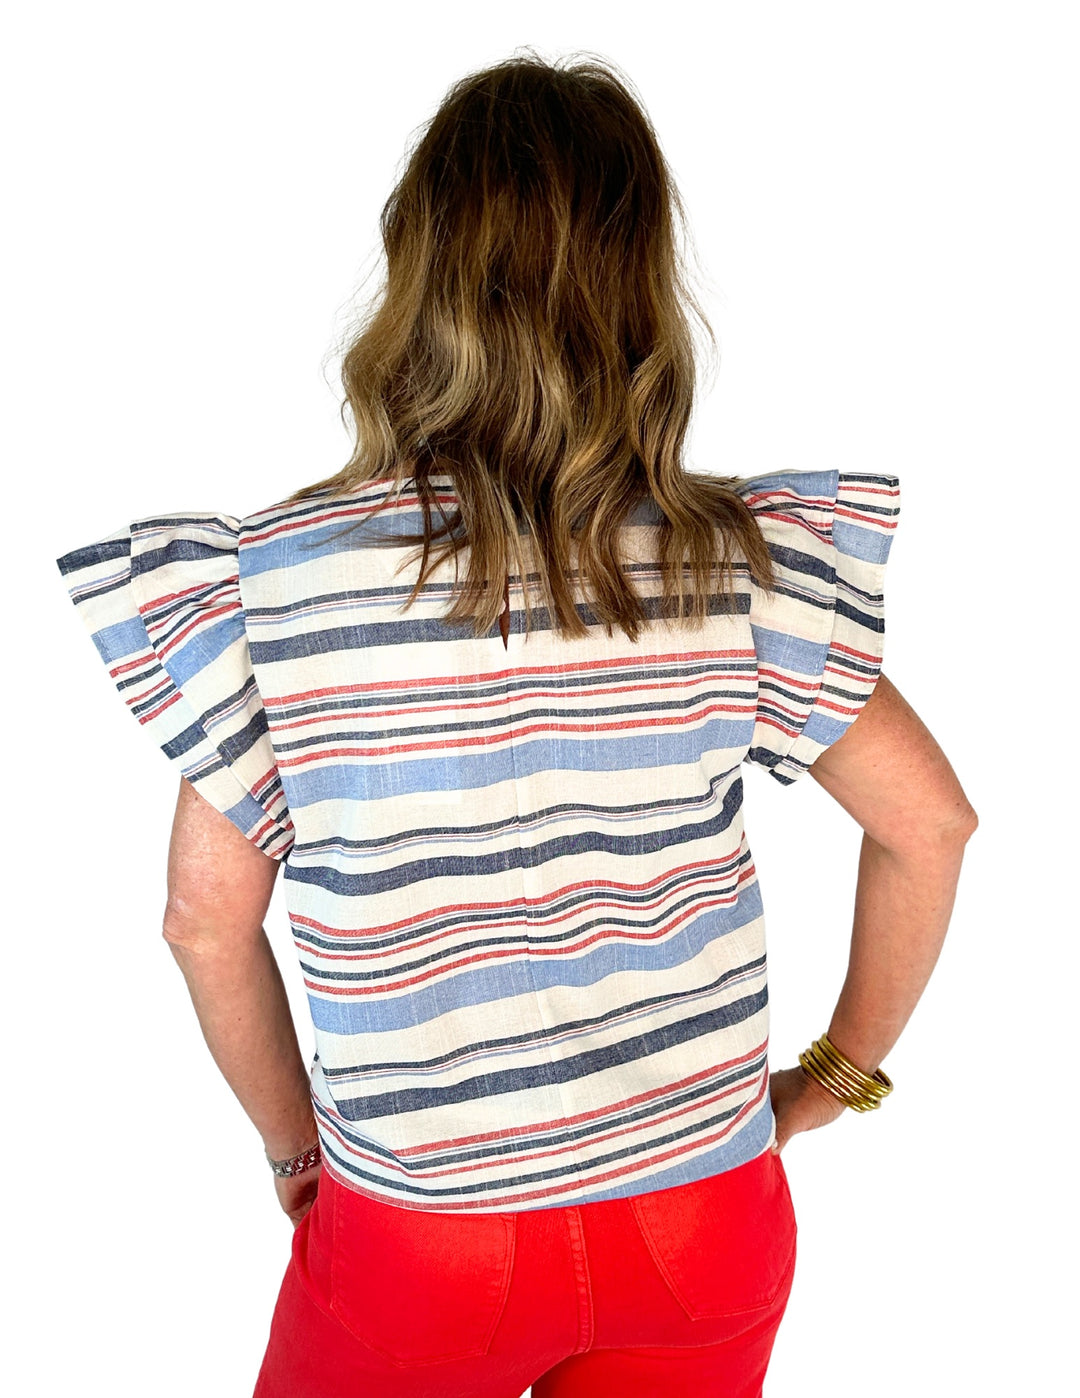 The Heritage Striped Top